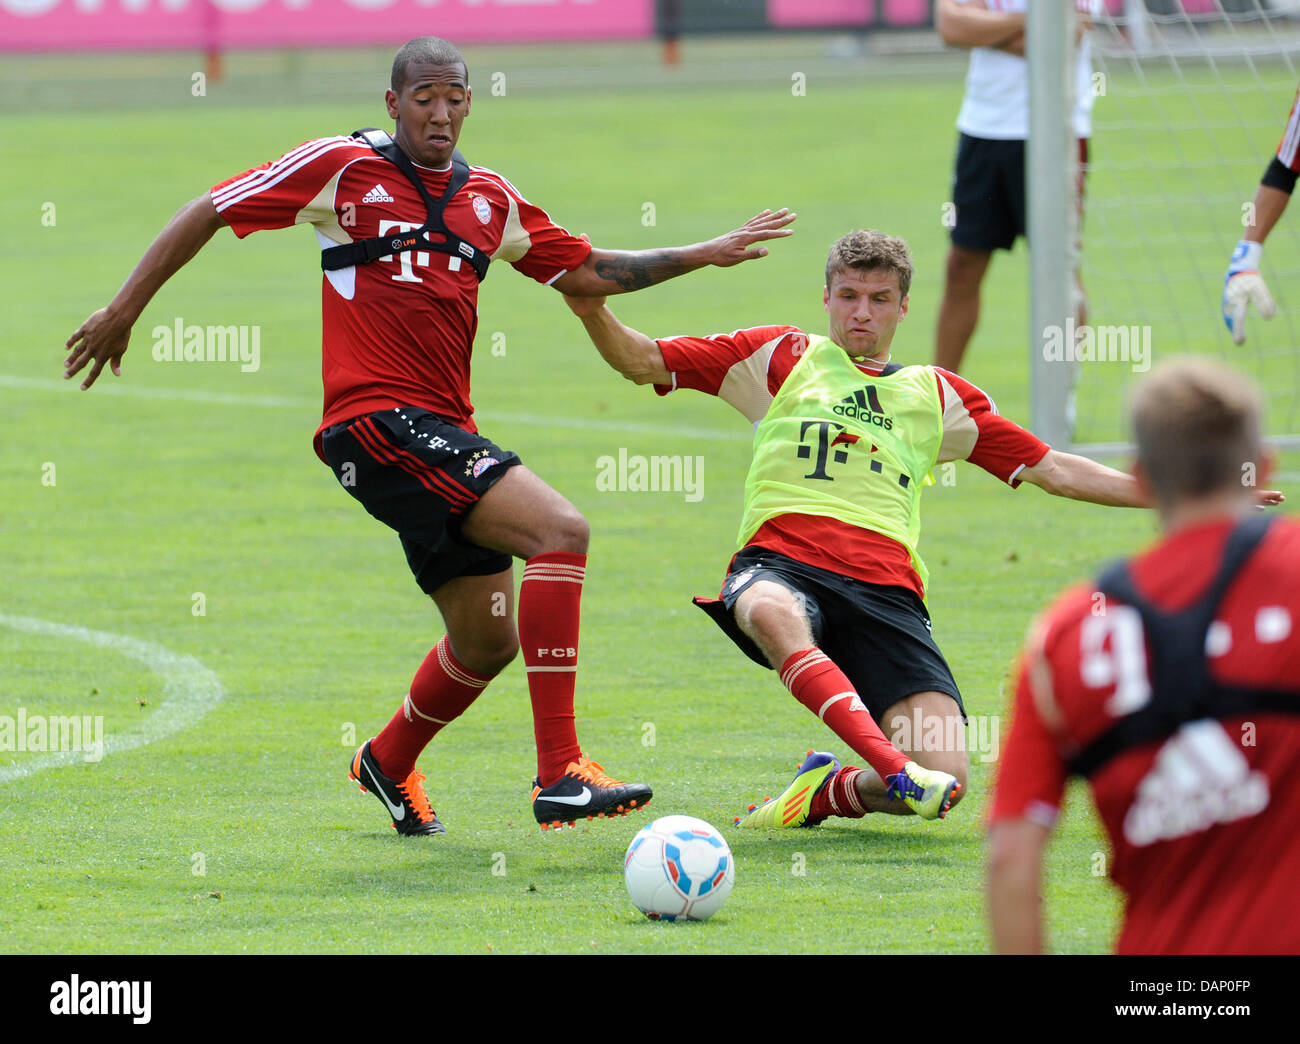 New FC Bayern Munich player Jerome Boateng (L) and Thomas Mueller vie for the ball during practice at the Bundesliga club's trainig facilities in Munich, Germany, 17 July 2011. The 19-year-old Japanese player will be on loan this season. Photo: Andreas Gebert Stock Photo